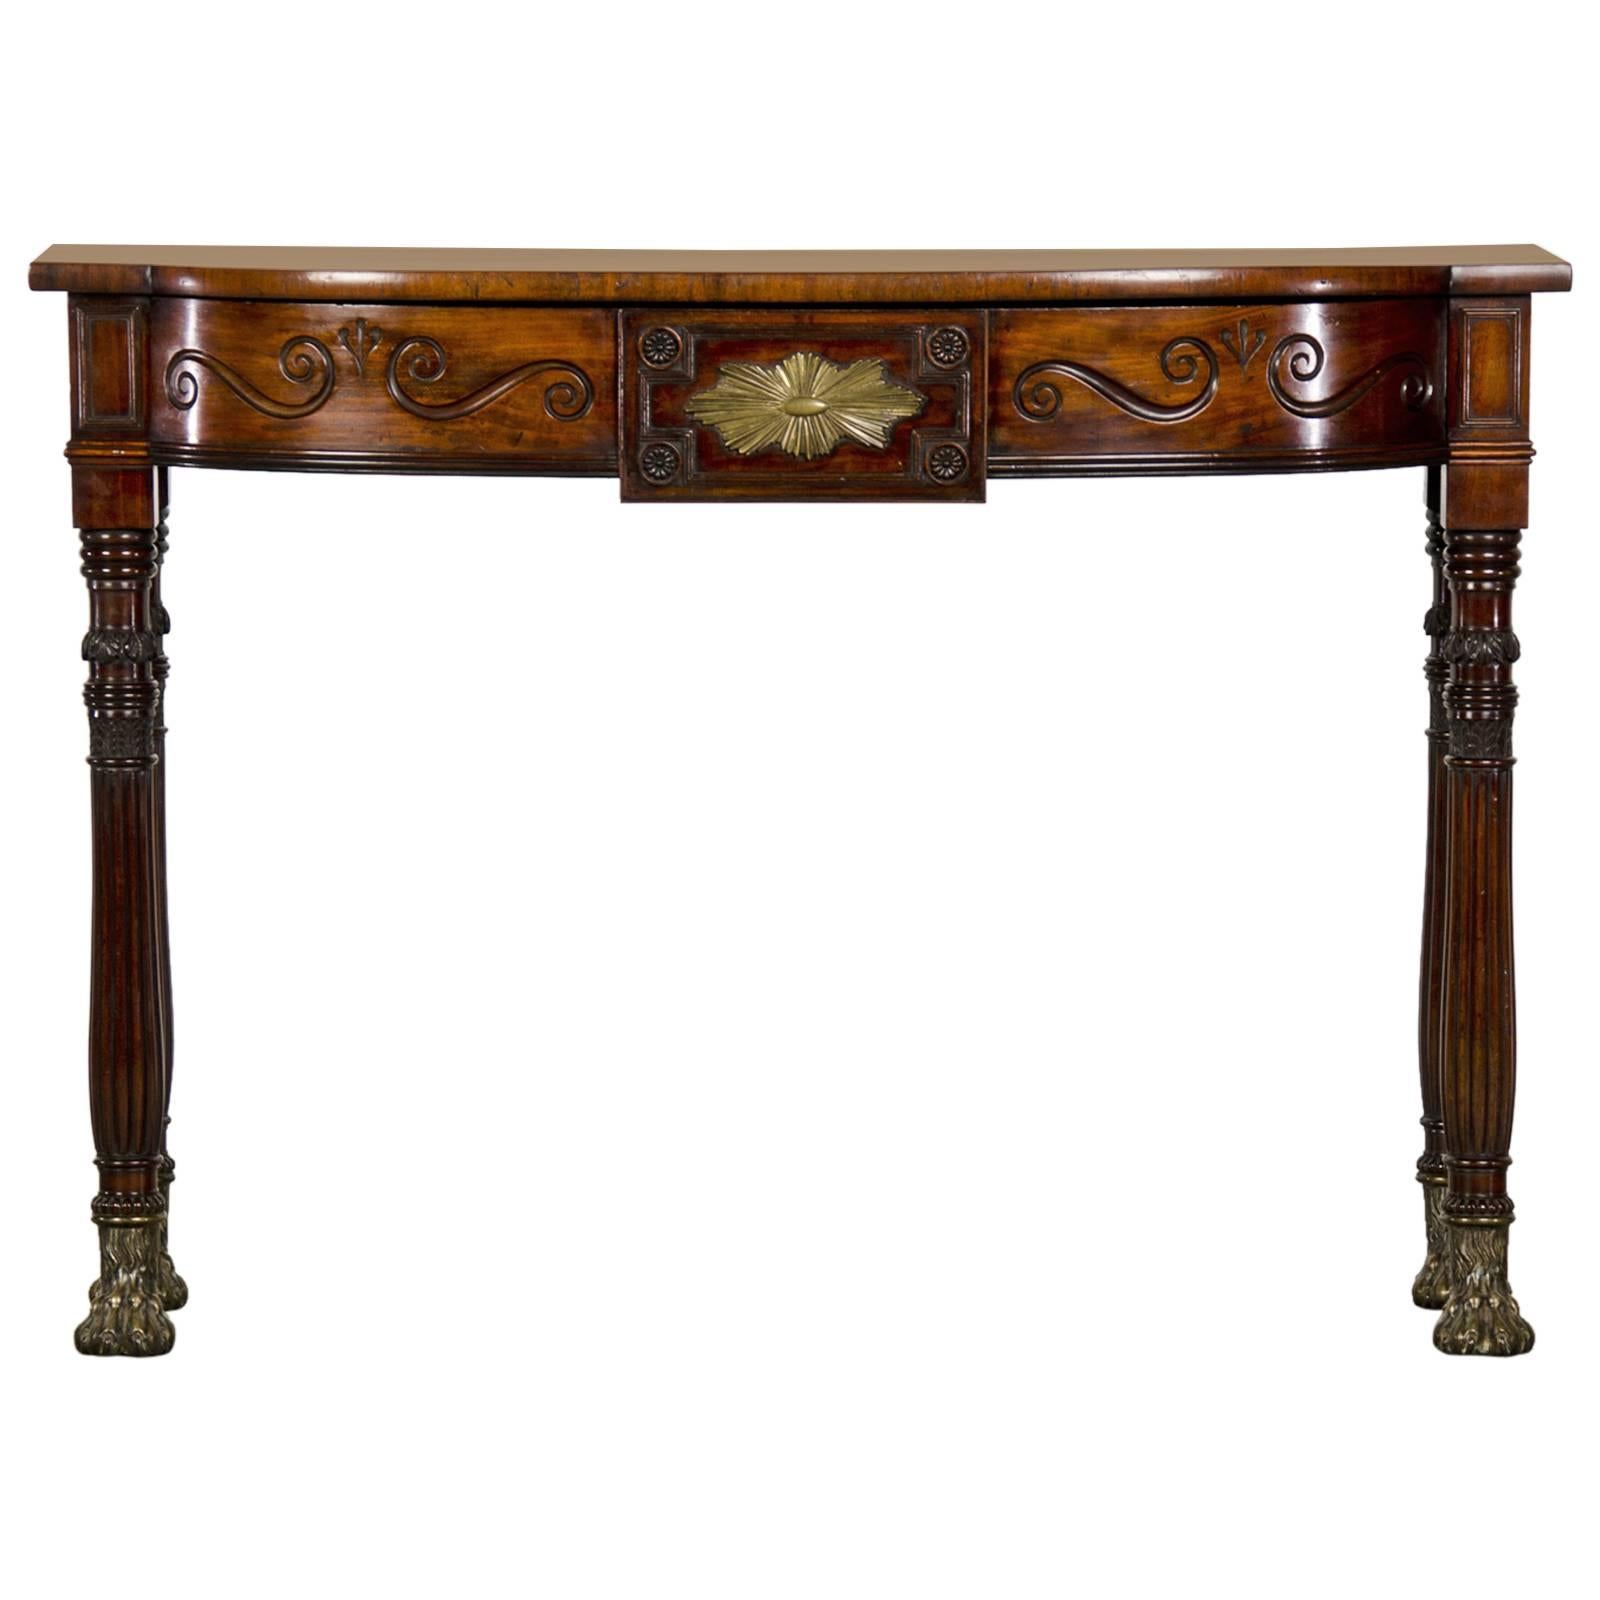 George Bullock Style William IV Period Antique English Mahogany Console Table For Sale